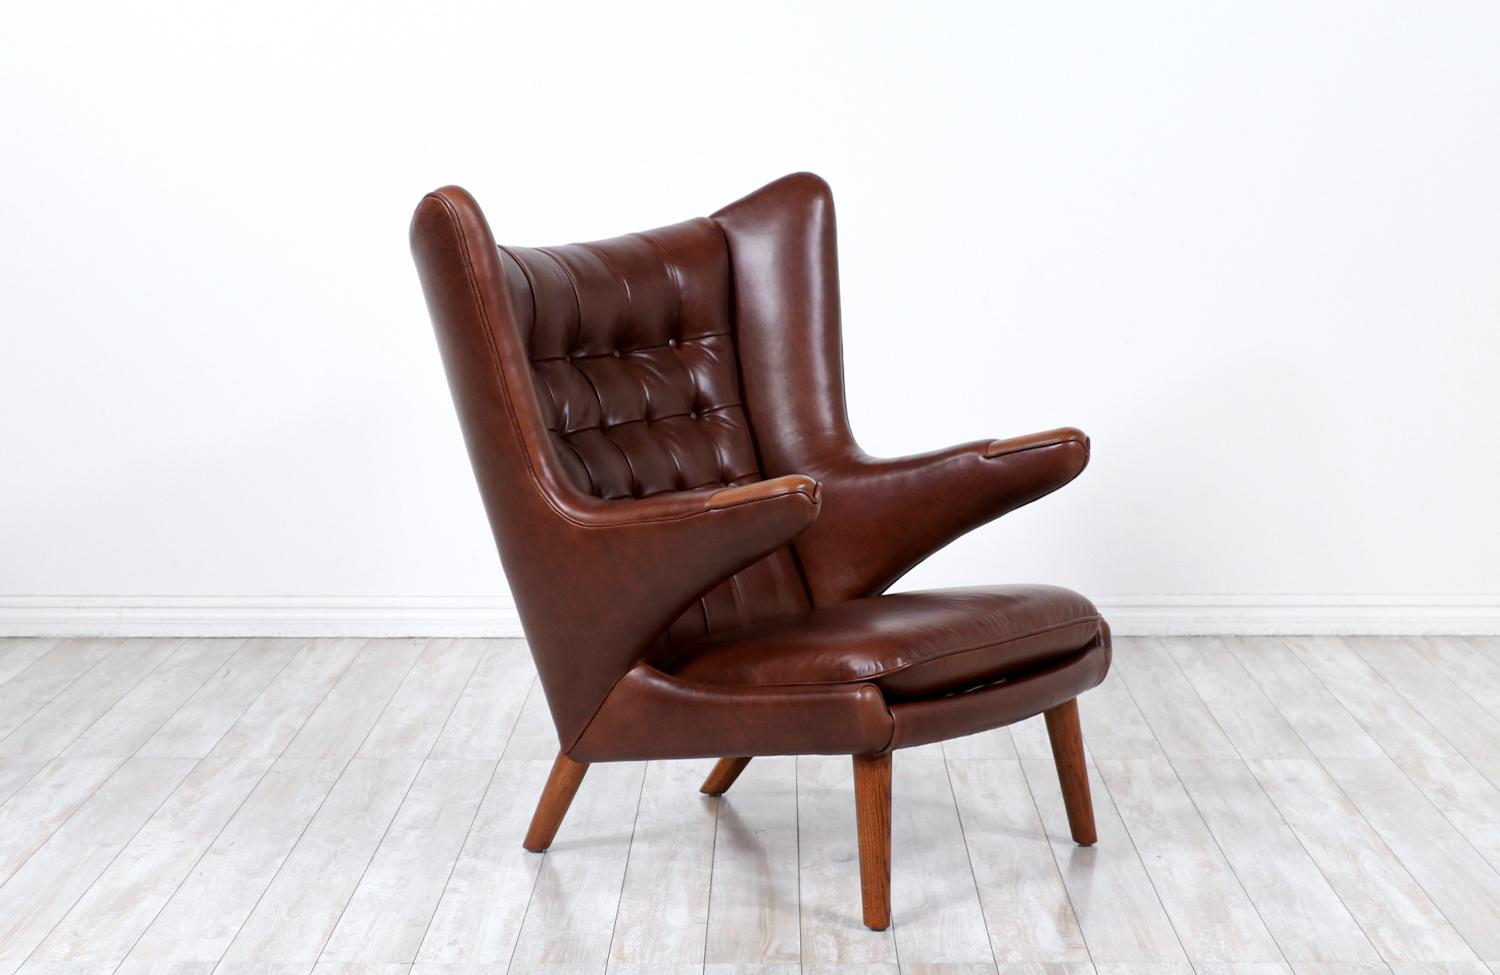 This iconic “Papa Bear” lounge chair were designed by Hans J. Wegner for the famous Danish workshop of A.P. Stolen in 1951. Originally named the AP-19, this model acquired the name “Papa Bear” when a journalist claimed that the chair looked like a